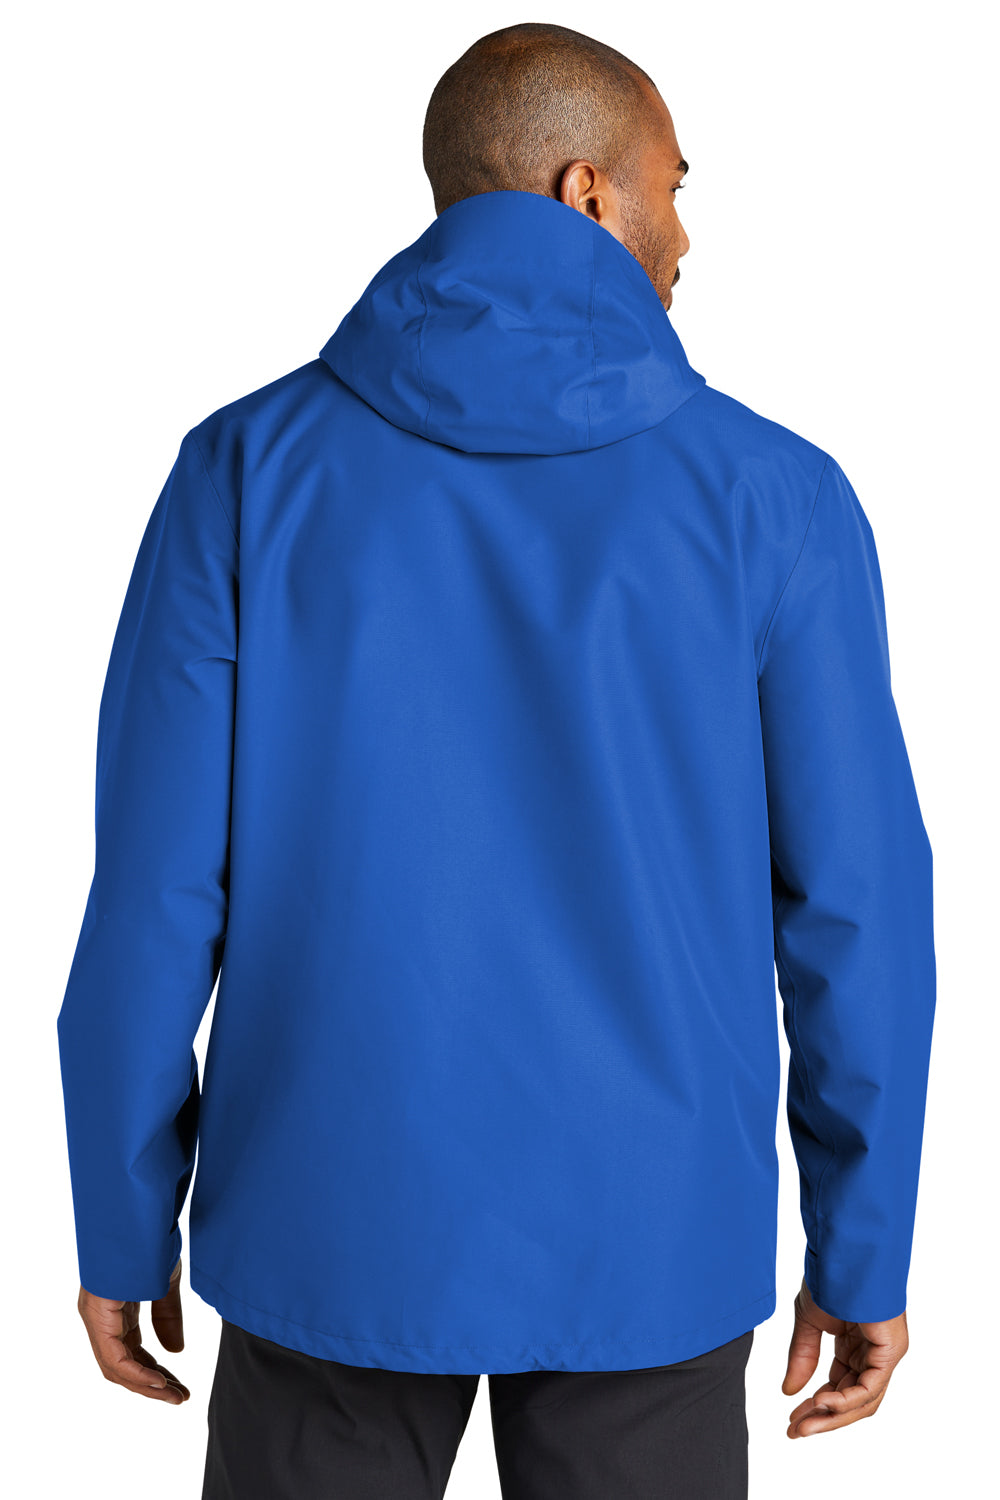 Port Authority J920 Collective Tech Full Zip Outer Shell Hooded Jacket True Royal Blue Back